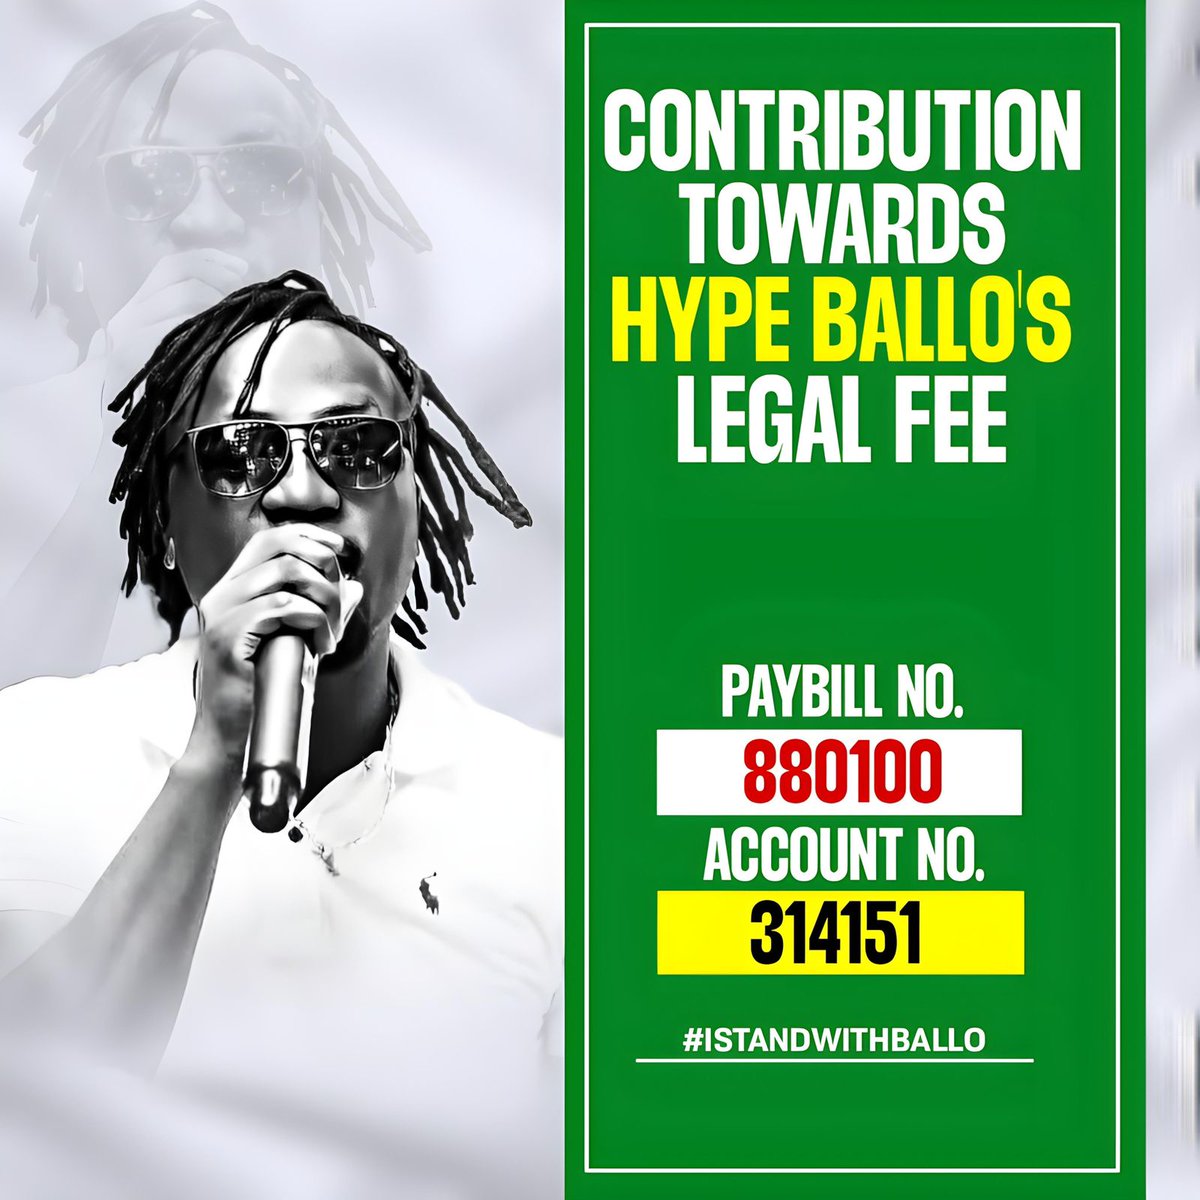 Fam, Let's Come Together & Stand With Our Brother @hypeballo
Any Amount Will Go A Long Way.

PAYBILL: 880100
ACC: 314151
Name: Perez Ambala

#StandWithBallo
#FreeBallo
#BalloSioBouncer